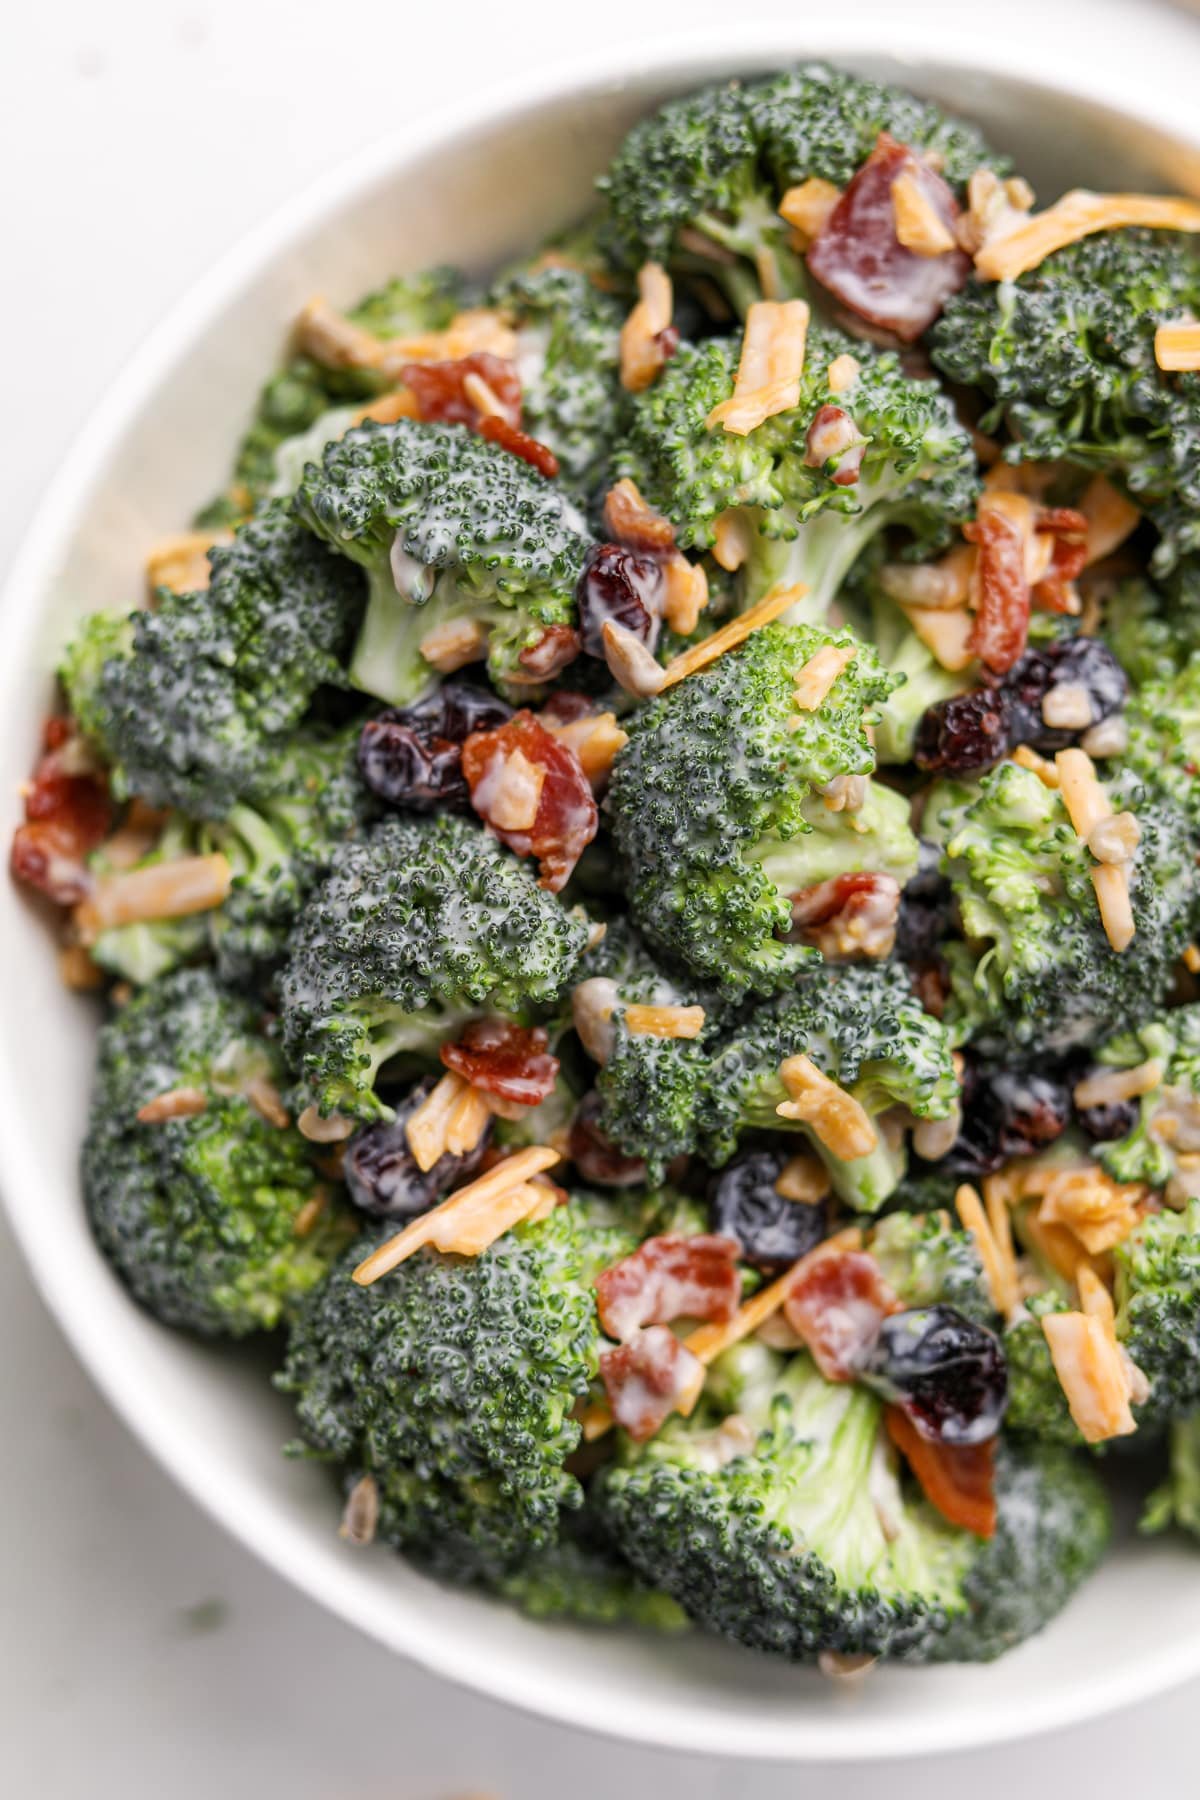 A close up of a bowl of broccoli salad featuring bacon crumbles and cheddar cheese shreds.